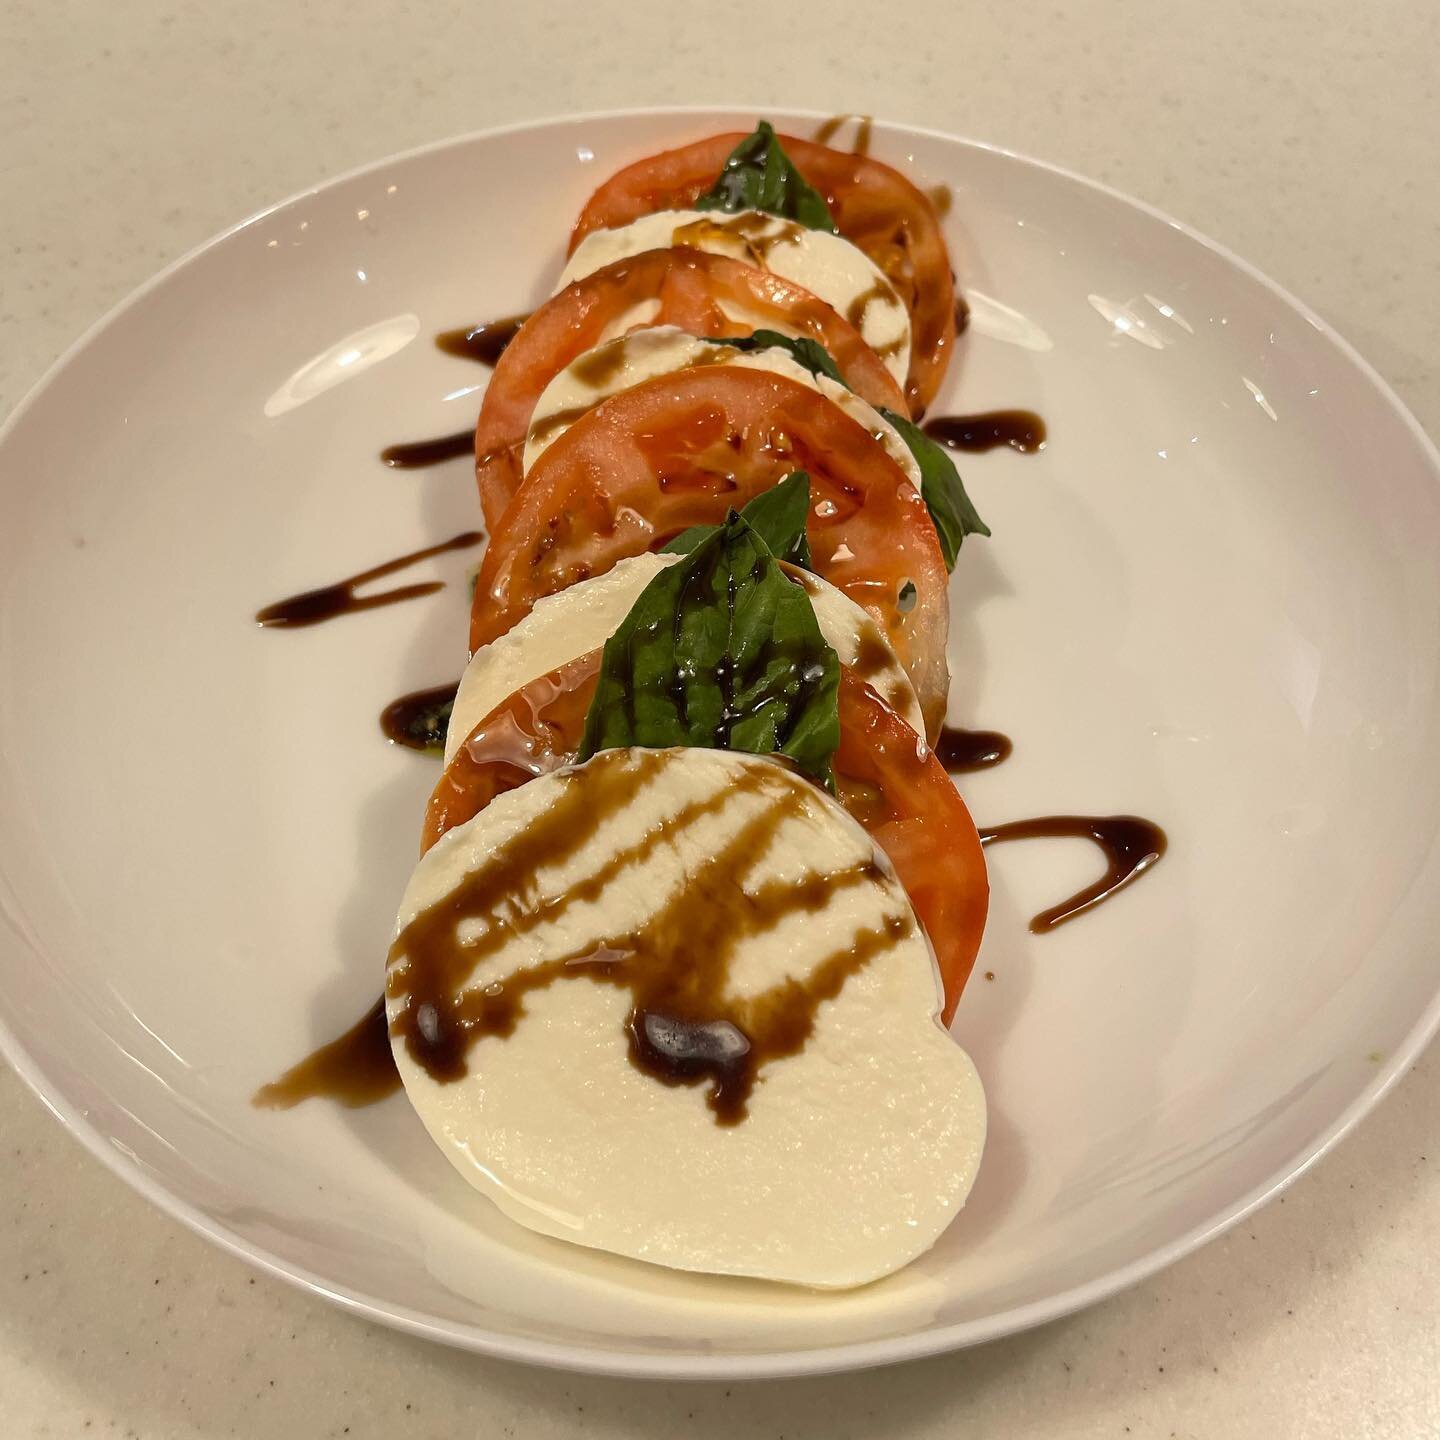 Trying to keep to your diet regime during this holiday season? Why not start it off with a caprese salad? 

Find this caprese salad at our Kaimuki location with fresh mozzarella, red ripe tomatoes, basil leaves and balsamic vinaigrette. 

We know it&